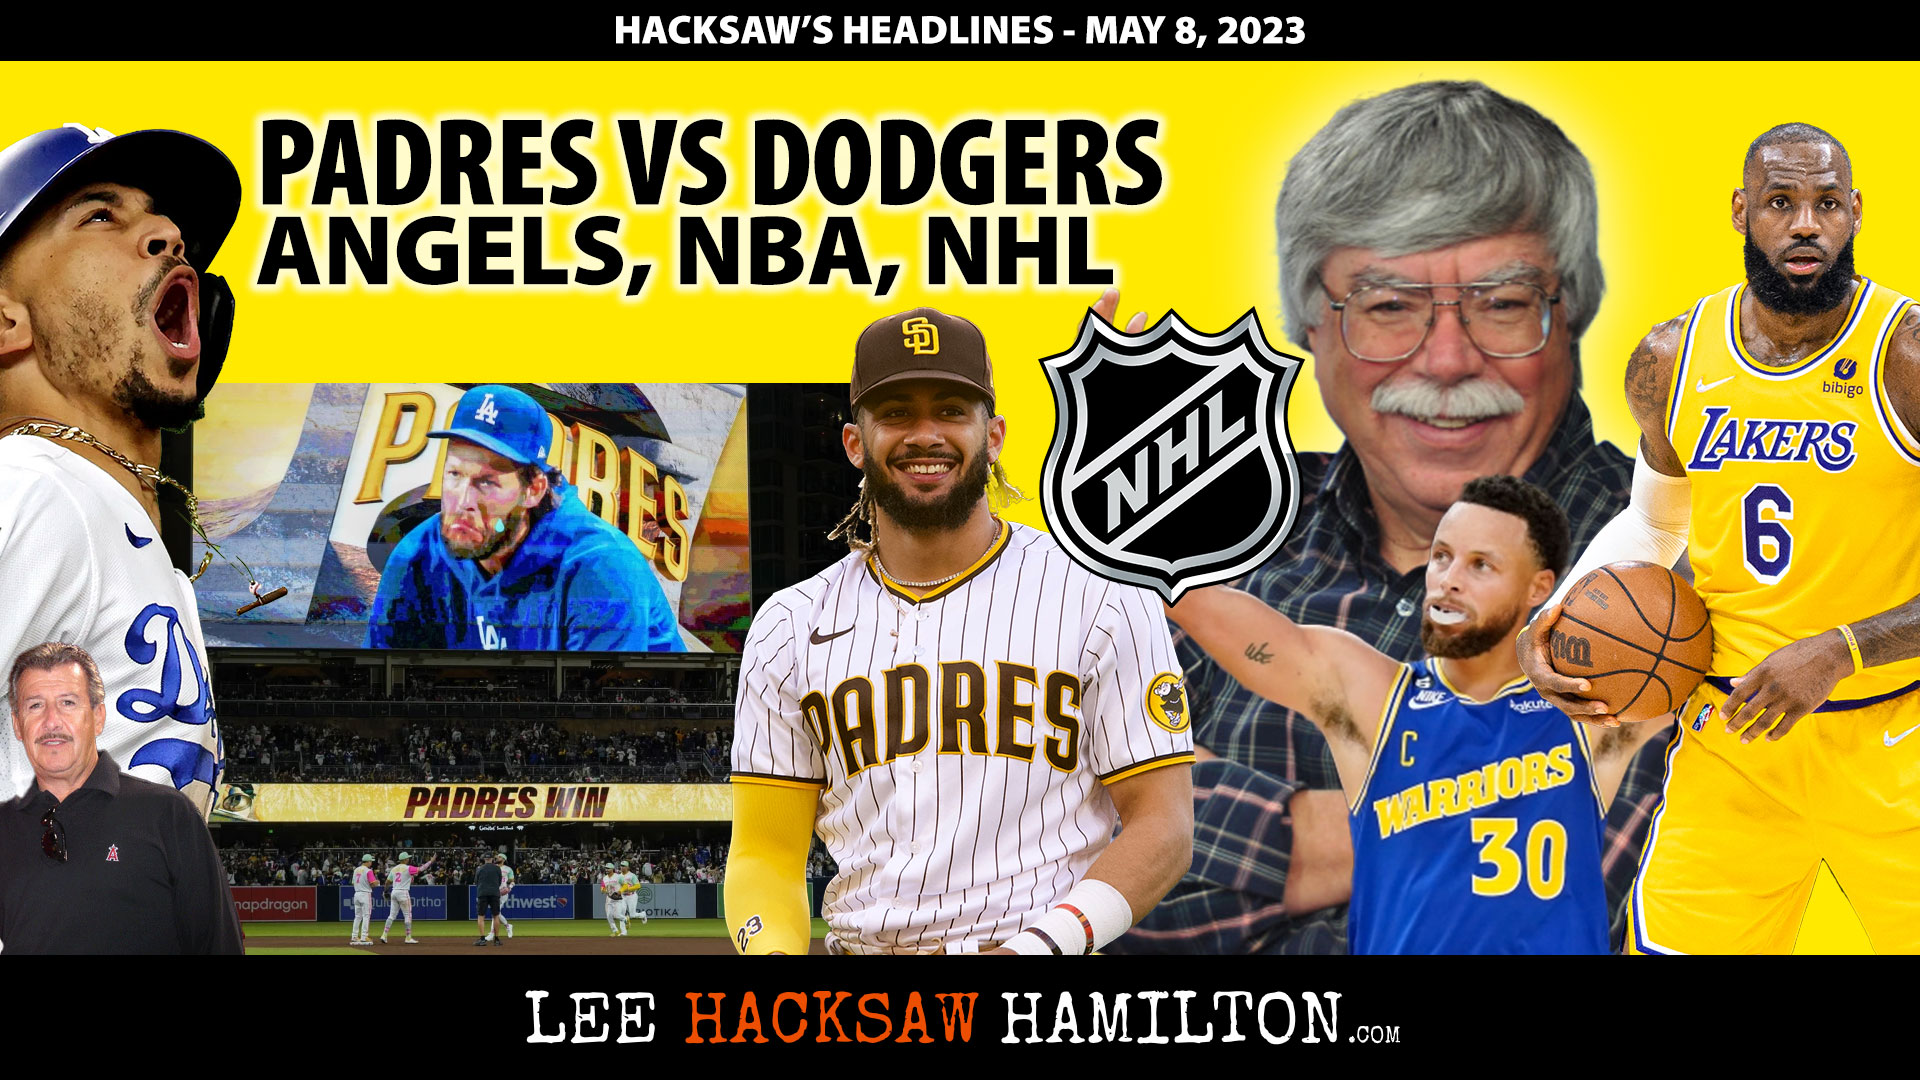 Lee Hacksaw Hamilton discusses Padres Dodgers Rivalry, Angels, Lakers vs Warriors, NHL Draft Lottery